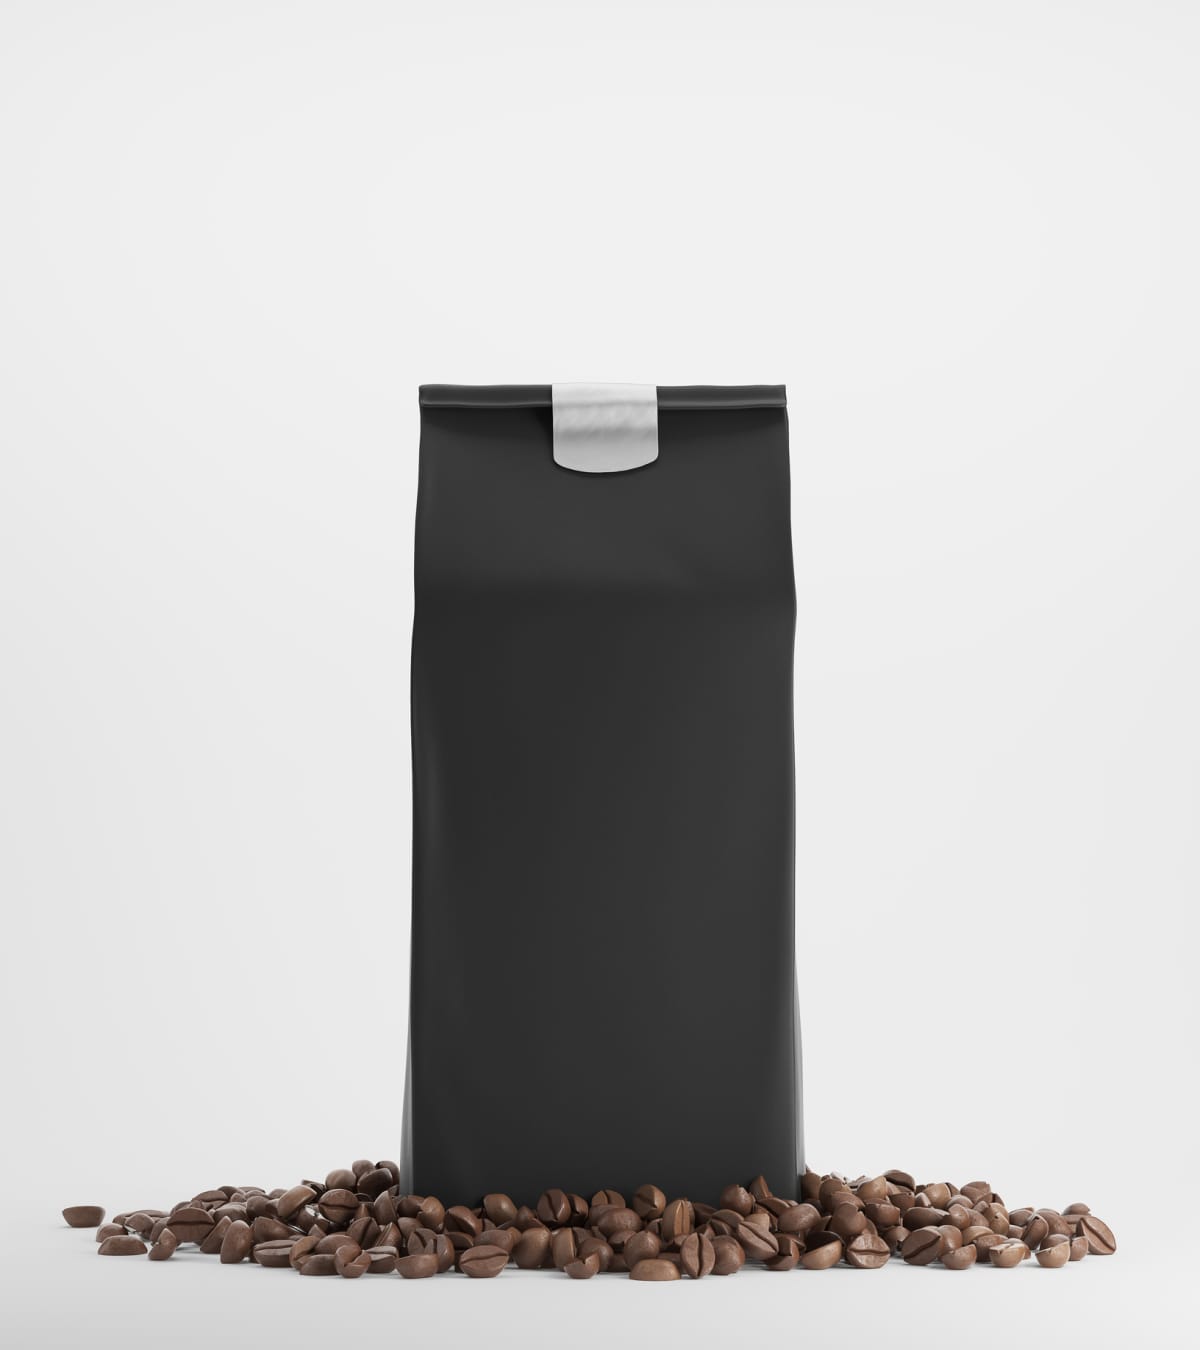 Black pack of coffee surrounded by coffee beans and standing against white background. 3d rendering. Mock up